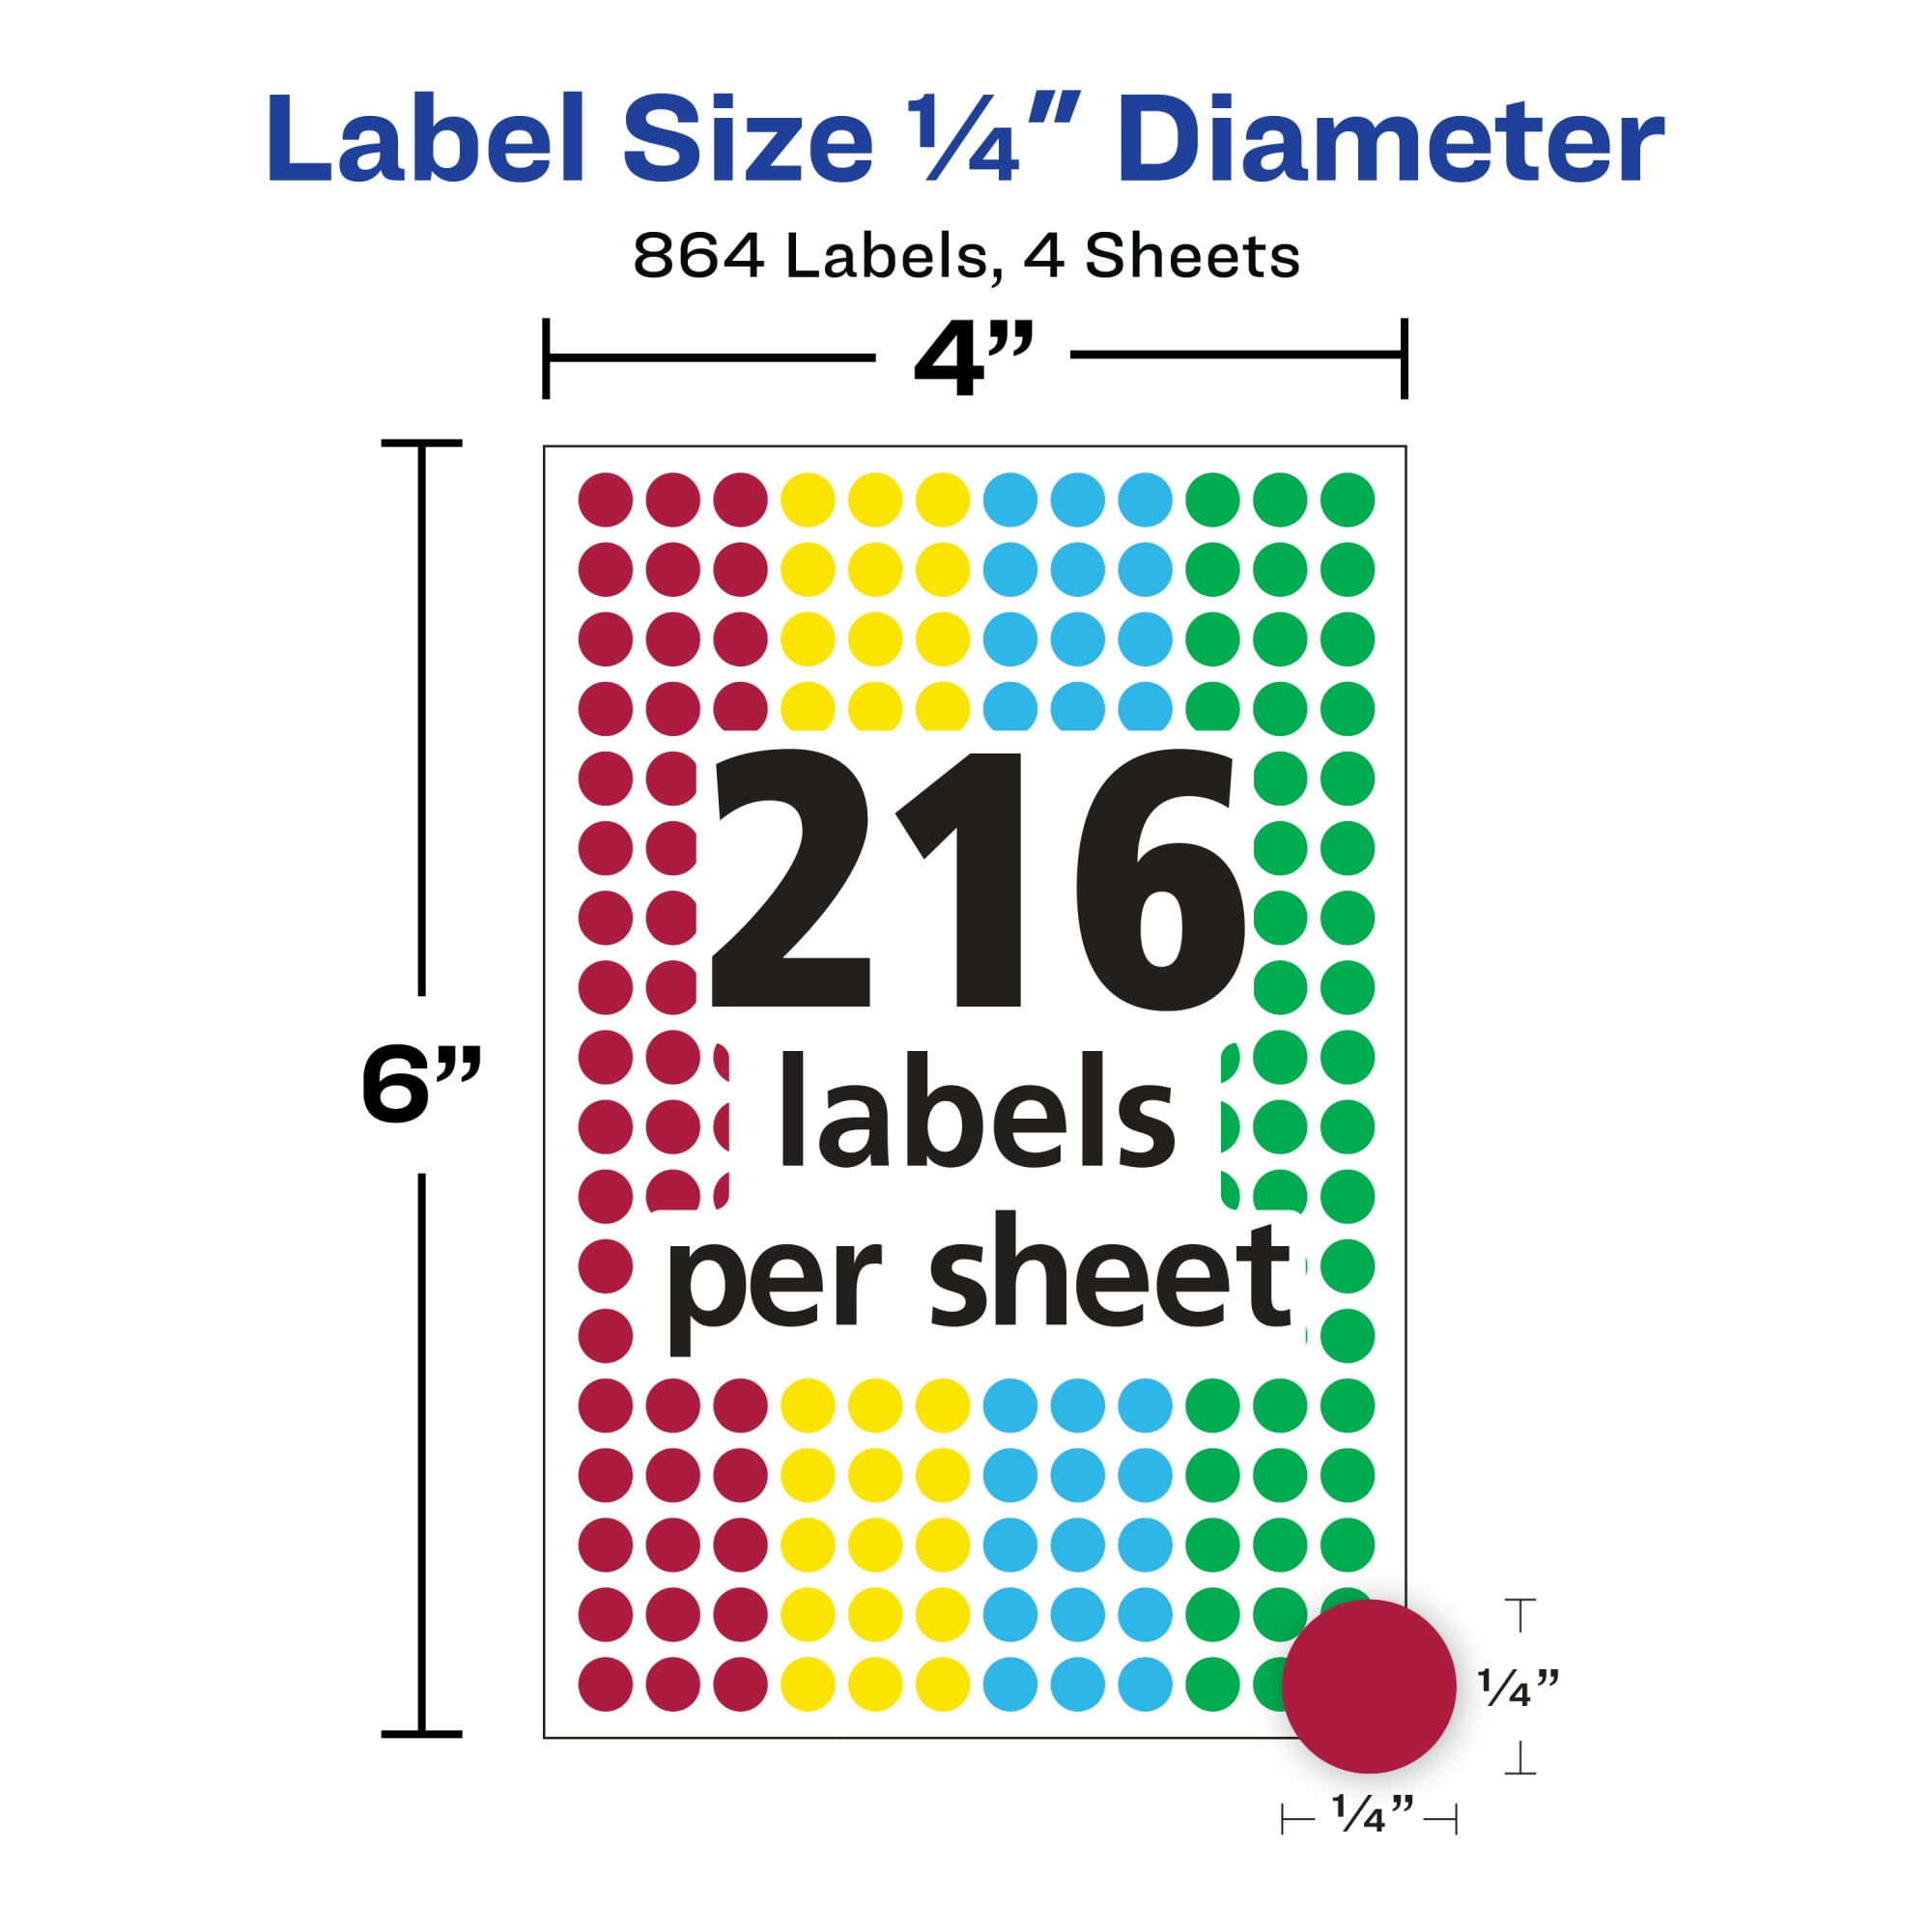 Medium 1/4 Removable Numbered 1-120 Mark-It Brand Dots for Maps, Reports or Projects - Eight Color Pack